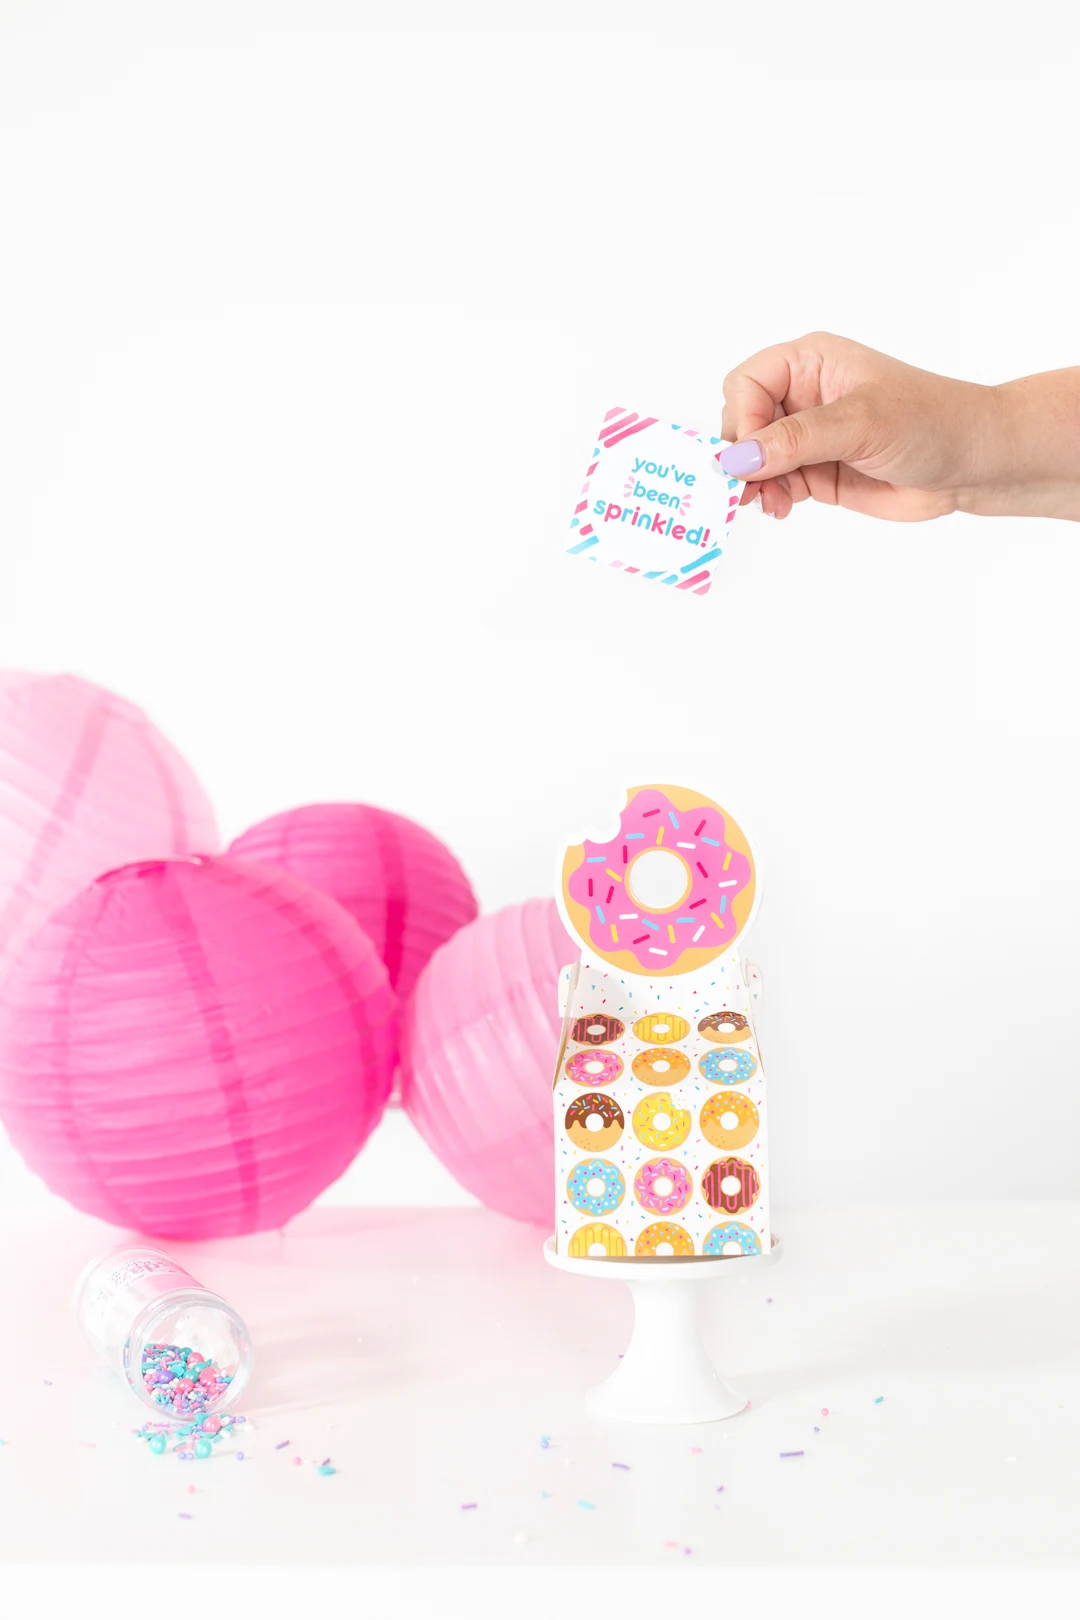 adding cute sprinkle gift tag to donut gift box